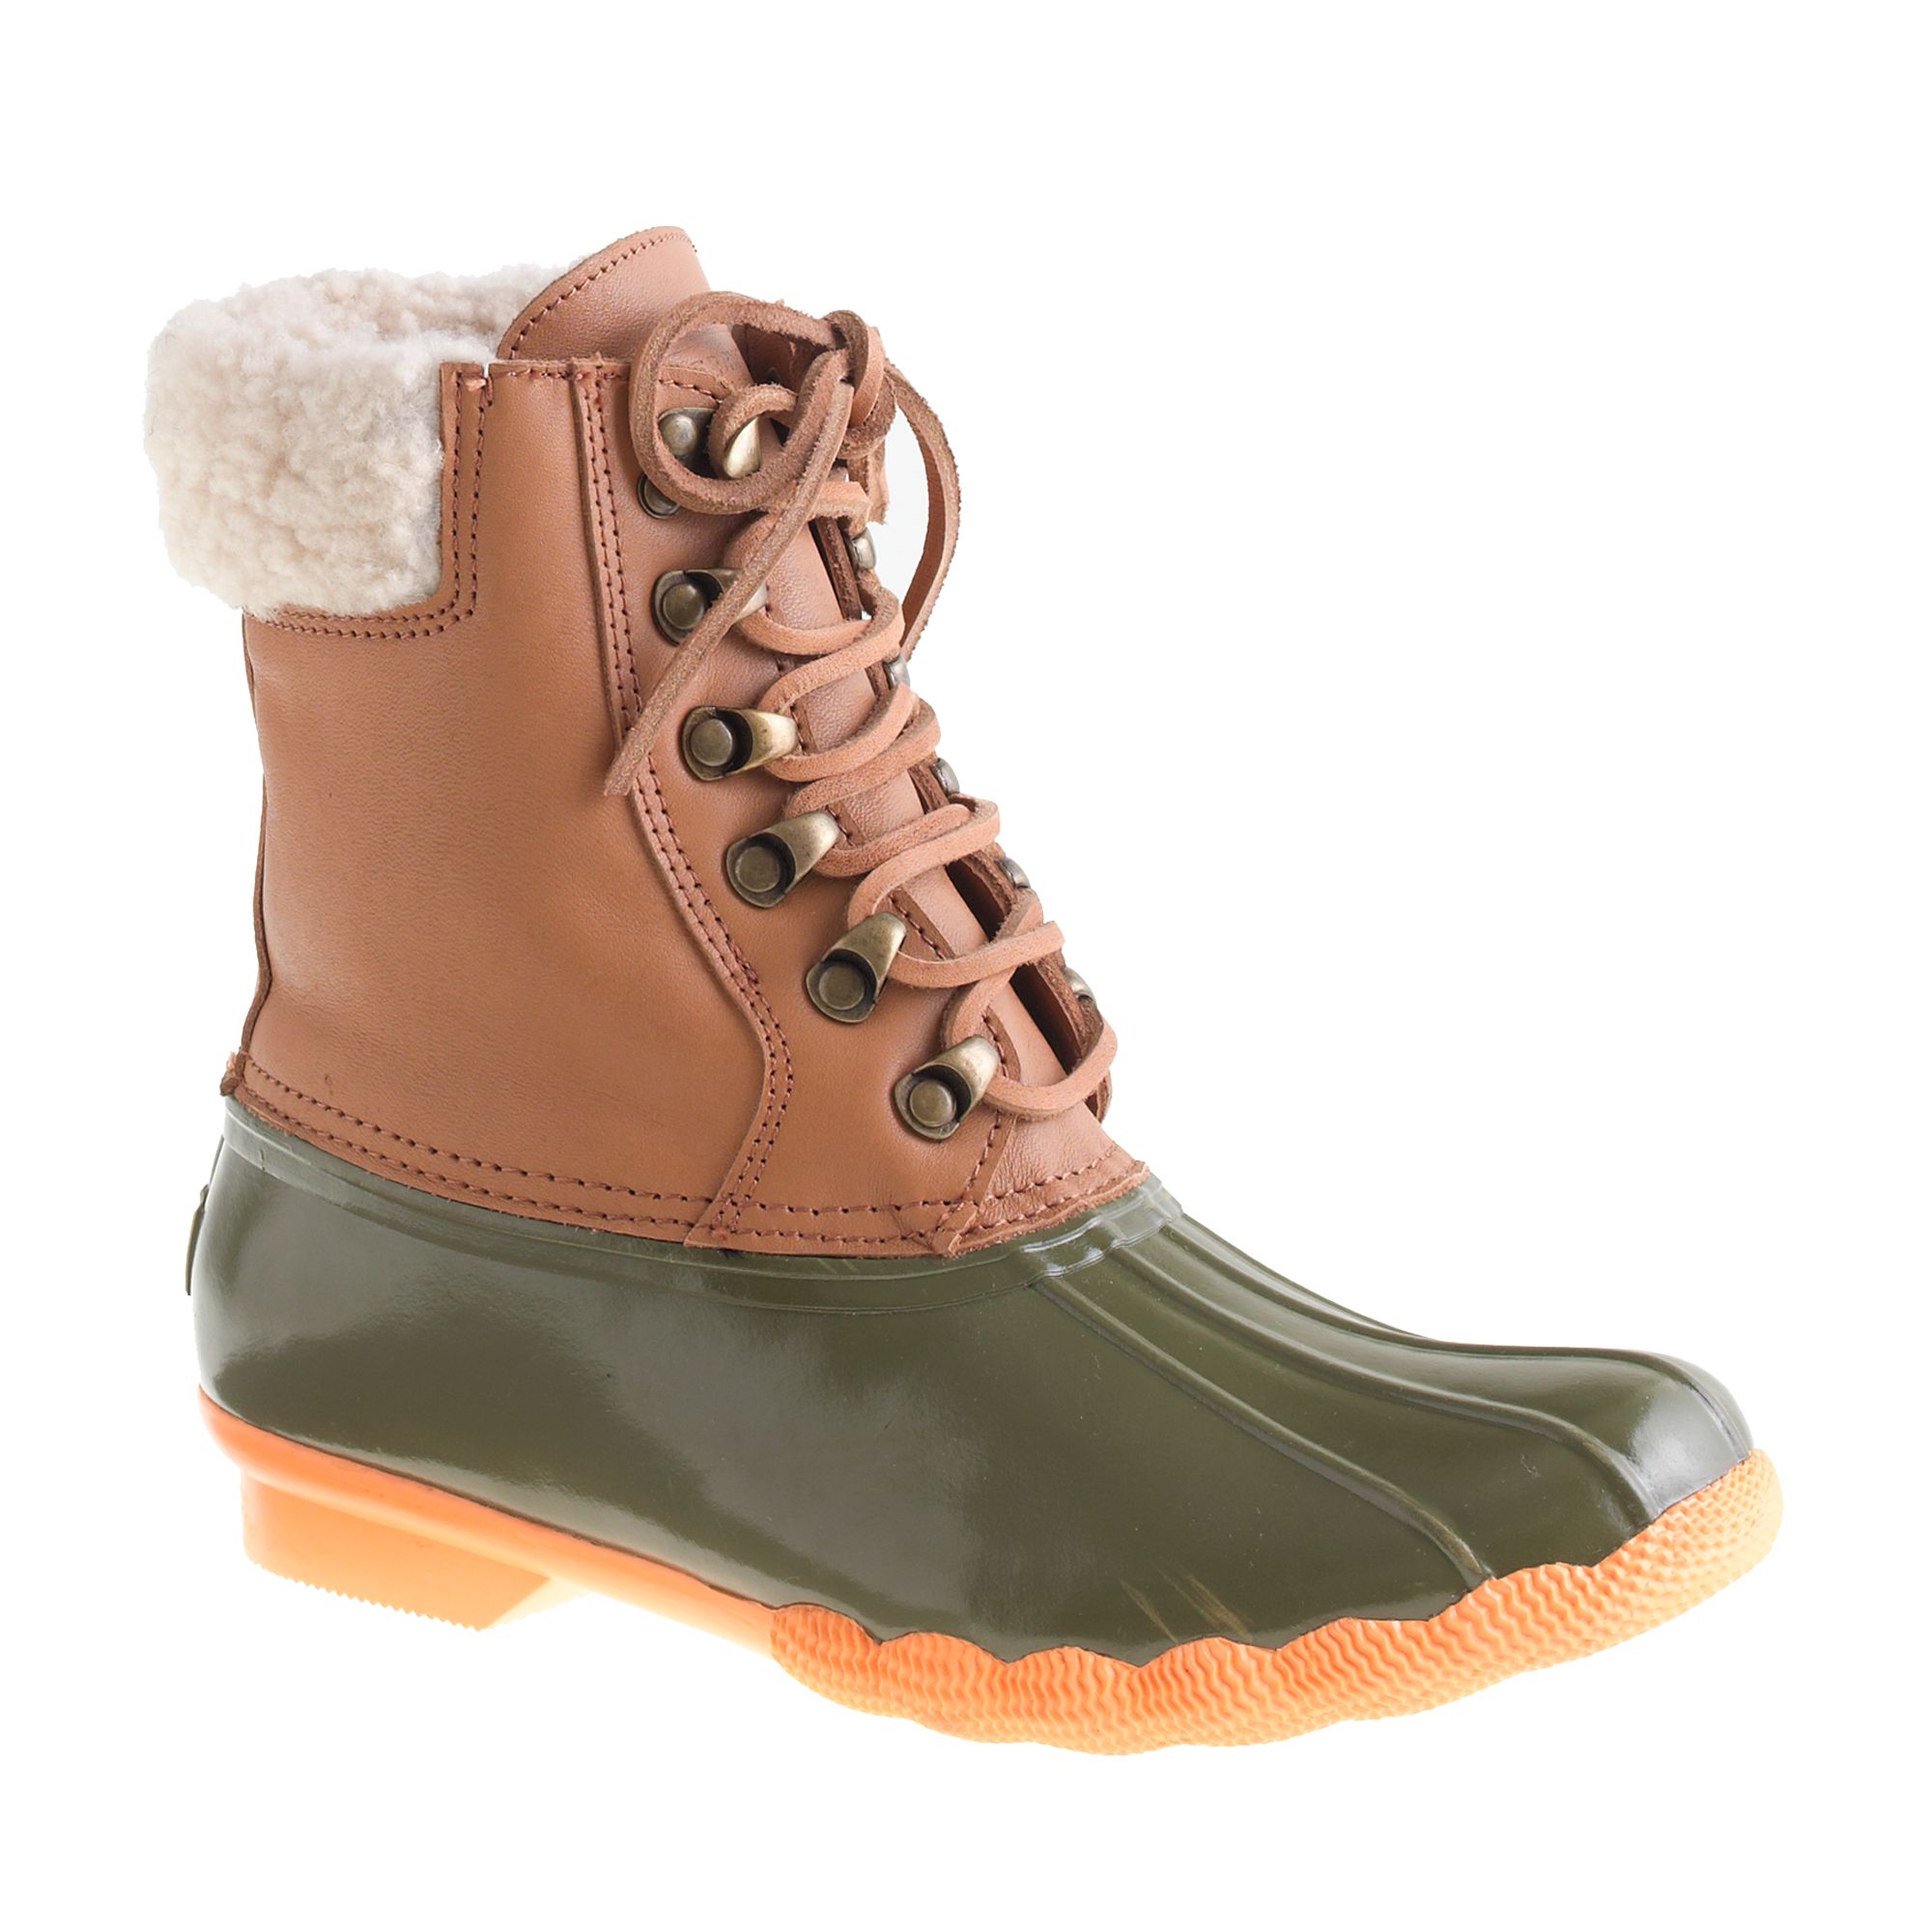 Lyst - J.Crew Sperry Topsider For Leather Shearwater Boots in Brown